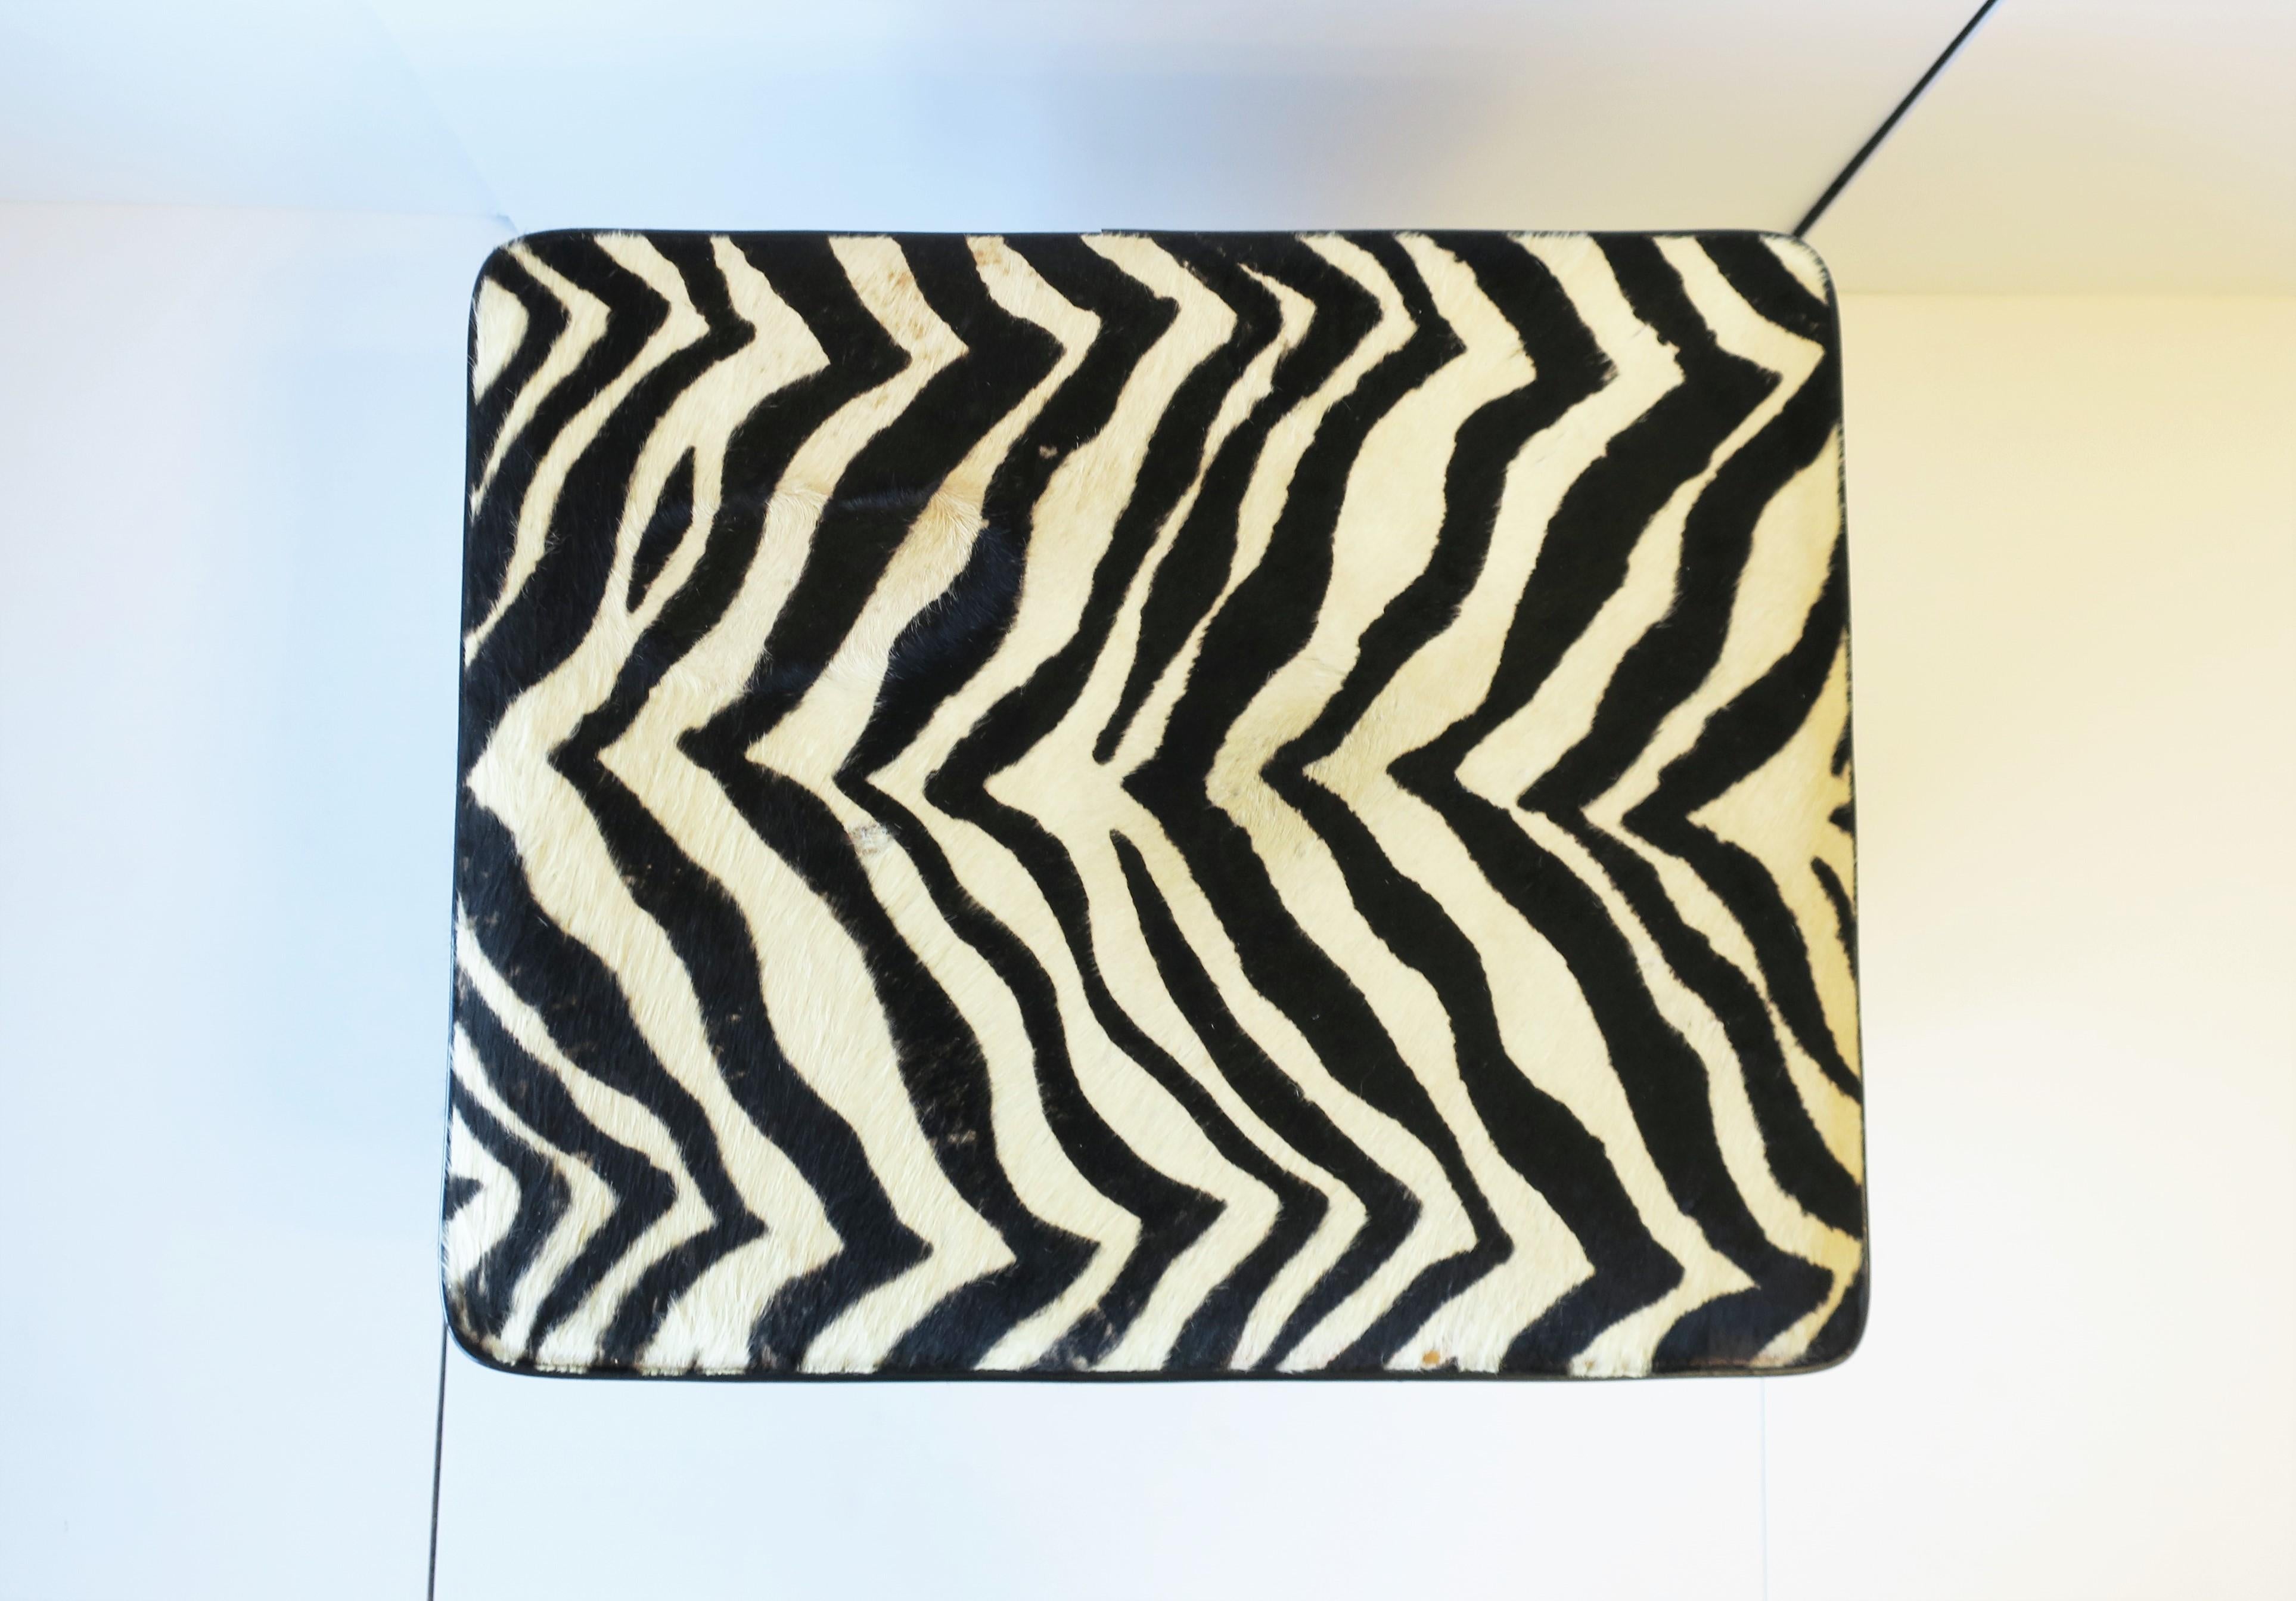 Zebra Hide Bench Stool with Storage Trunk and Tassels, circa 1980s 1990s In Good Condition For Sale In New York, NY